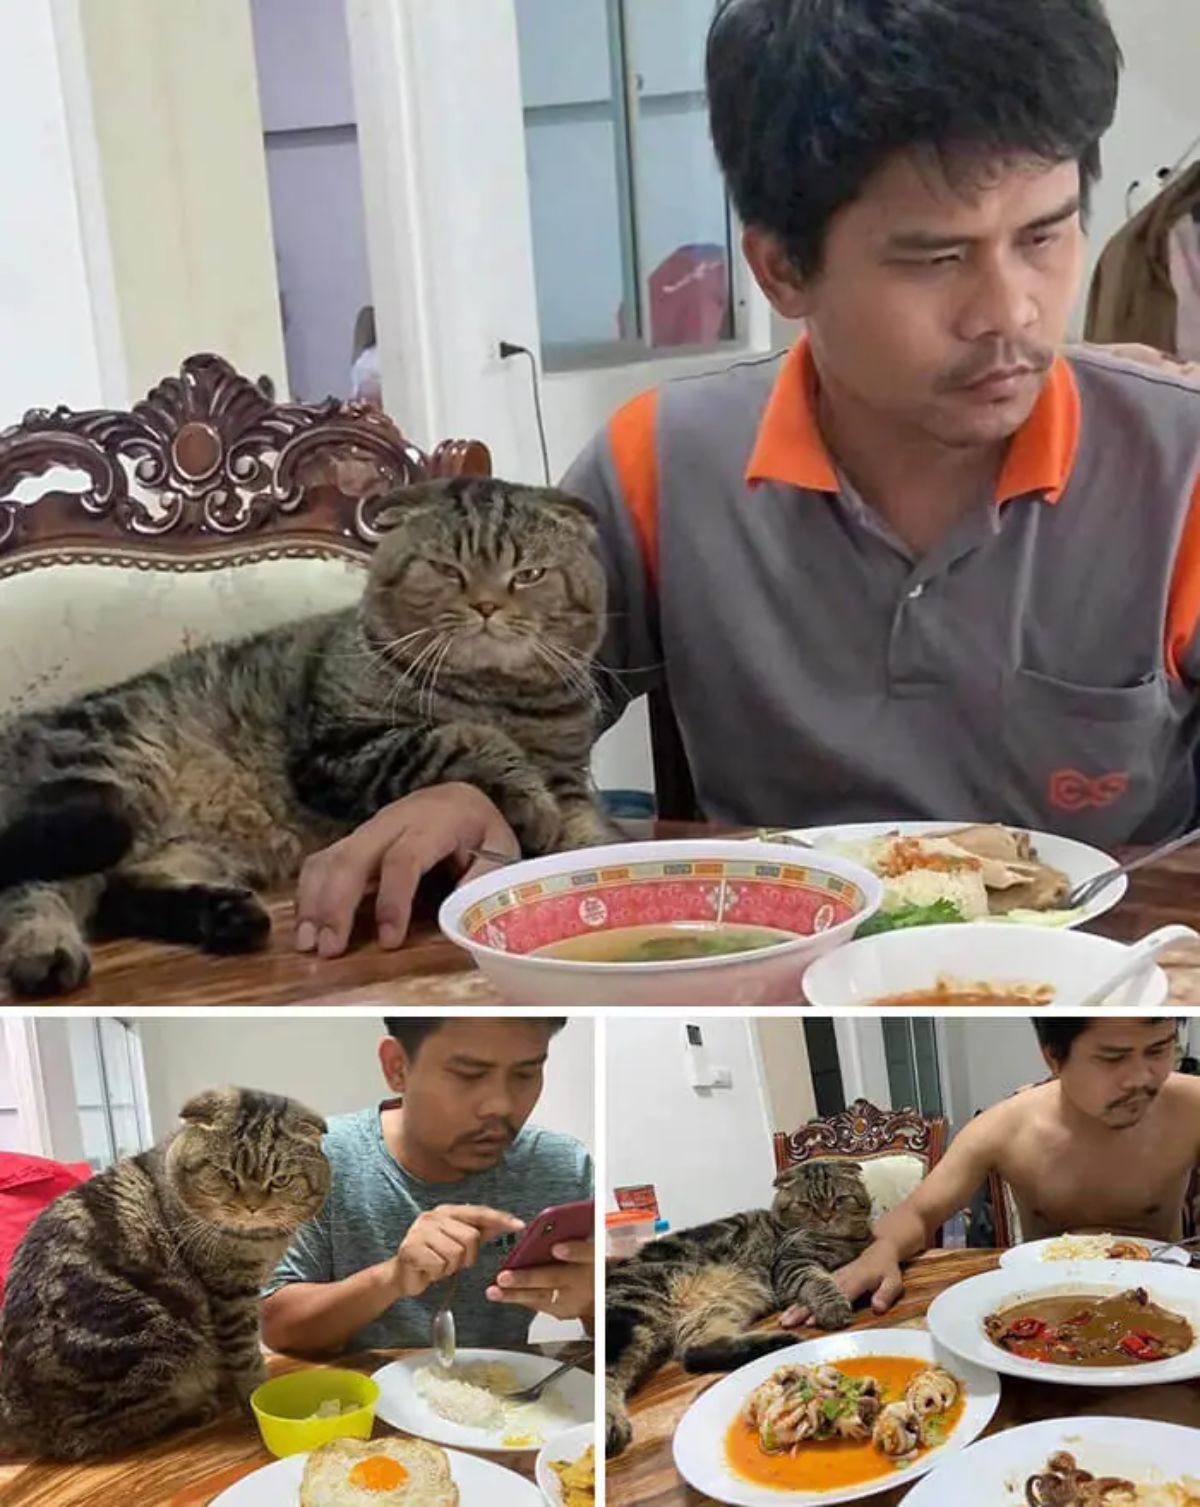 3 photos of a grey tabby cat laying across a man's arm on a wooden table